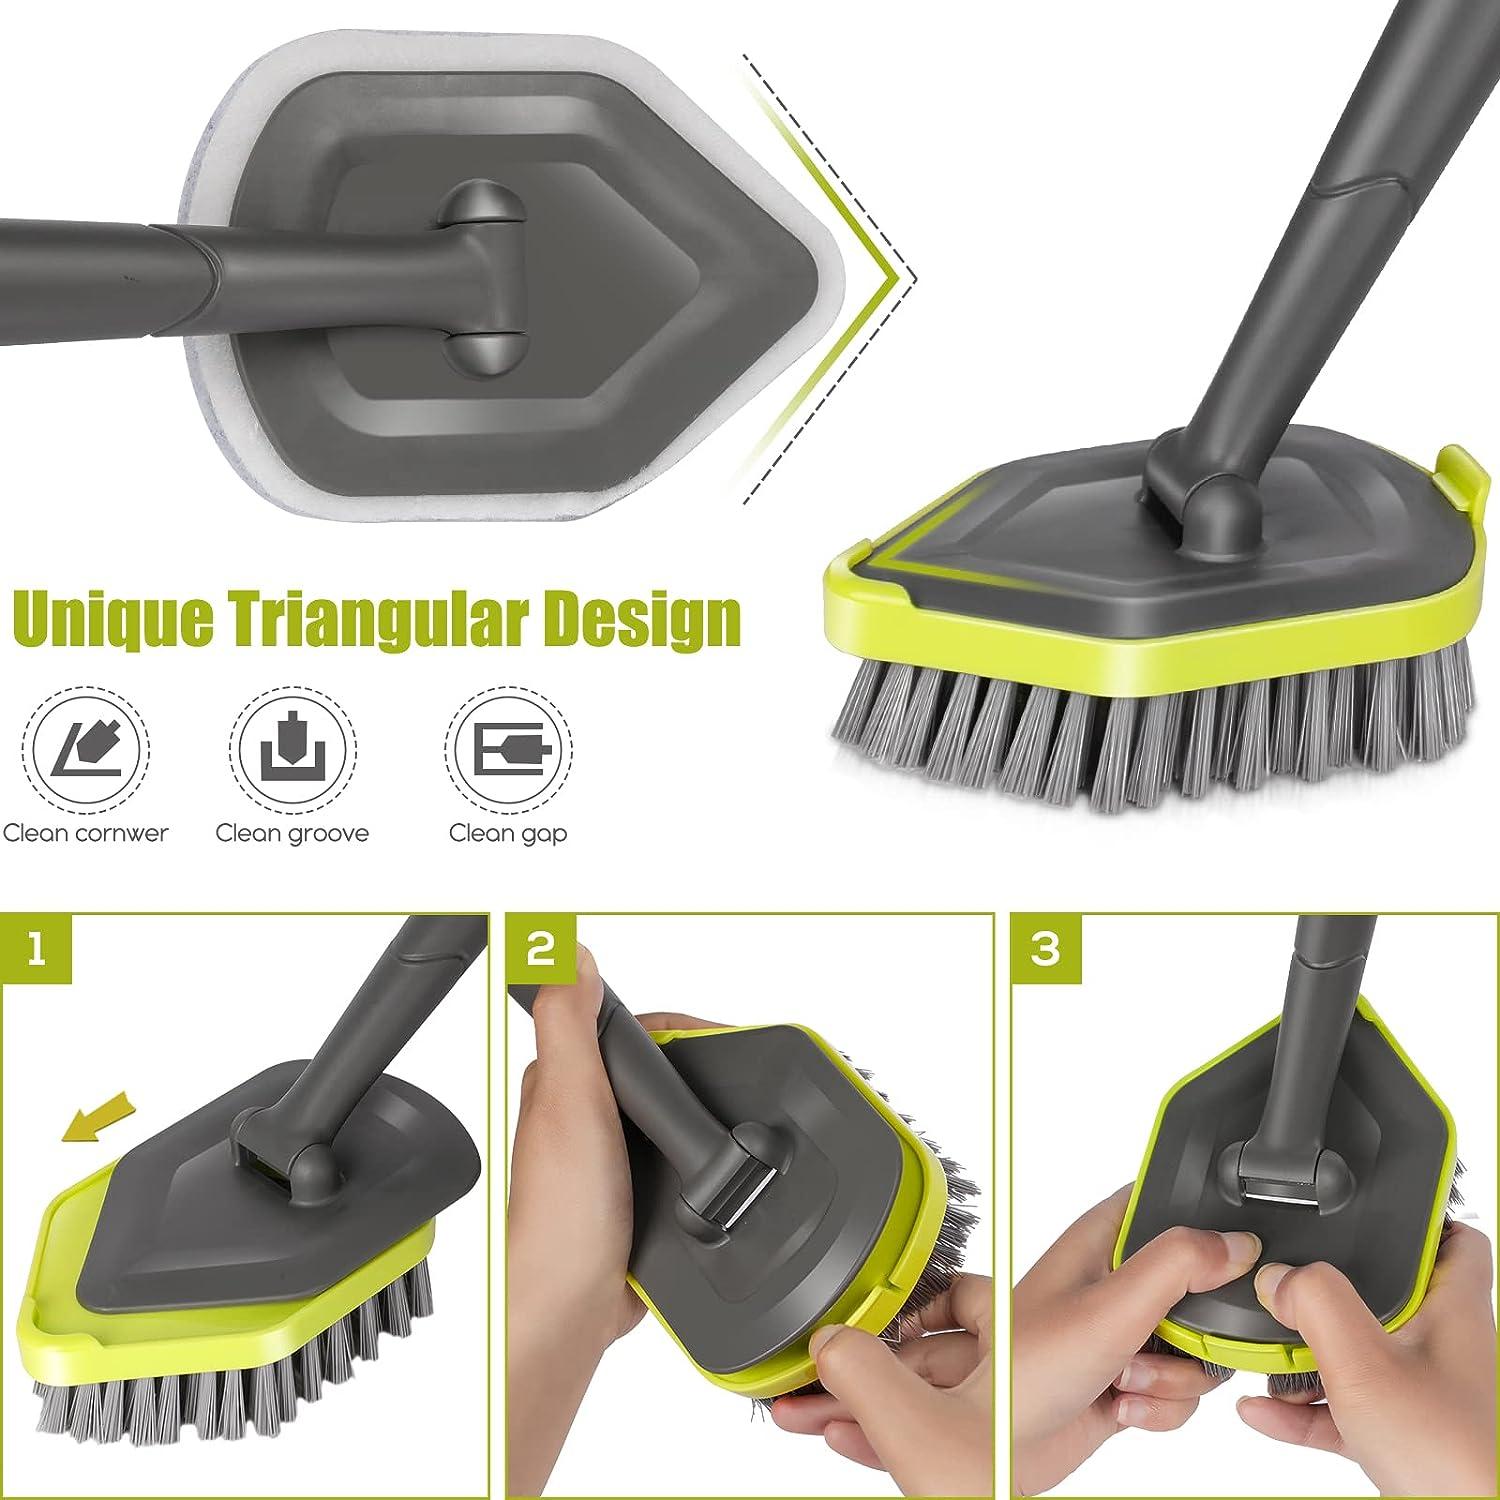 Flexible Household Gap Cleaning Brushes Tile Joints Scrubber Long